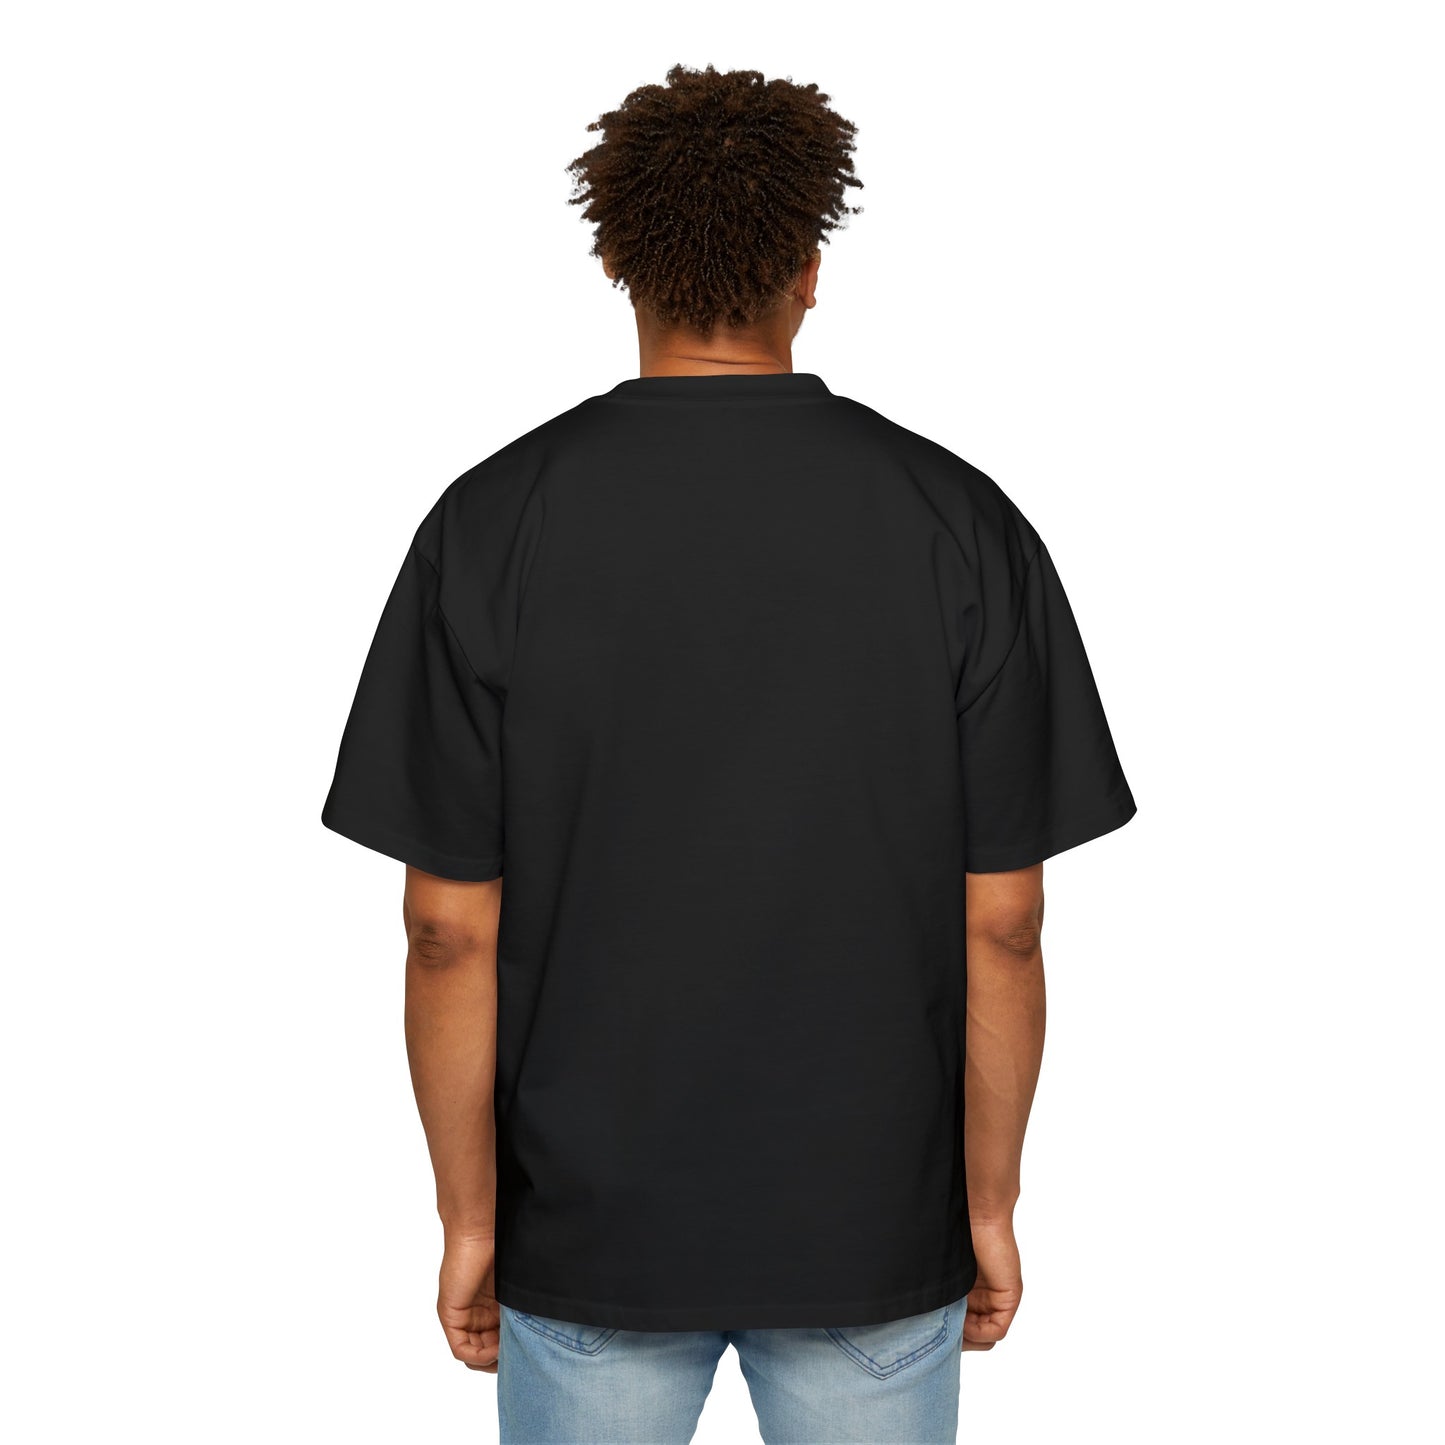 Jahreal Whitted Oversized Tee